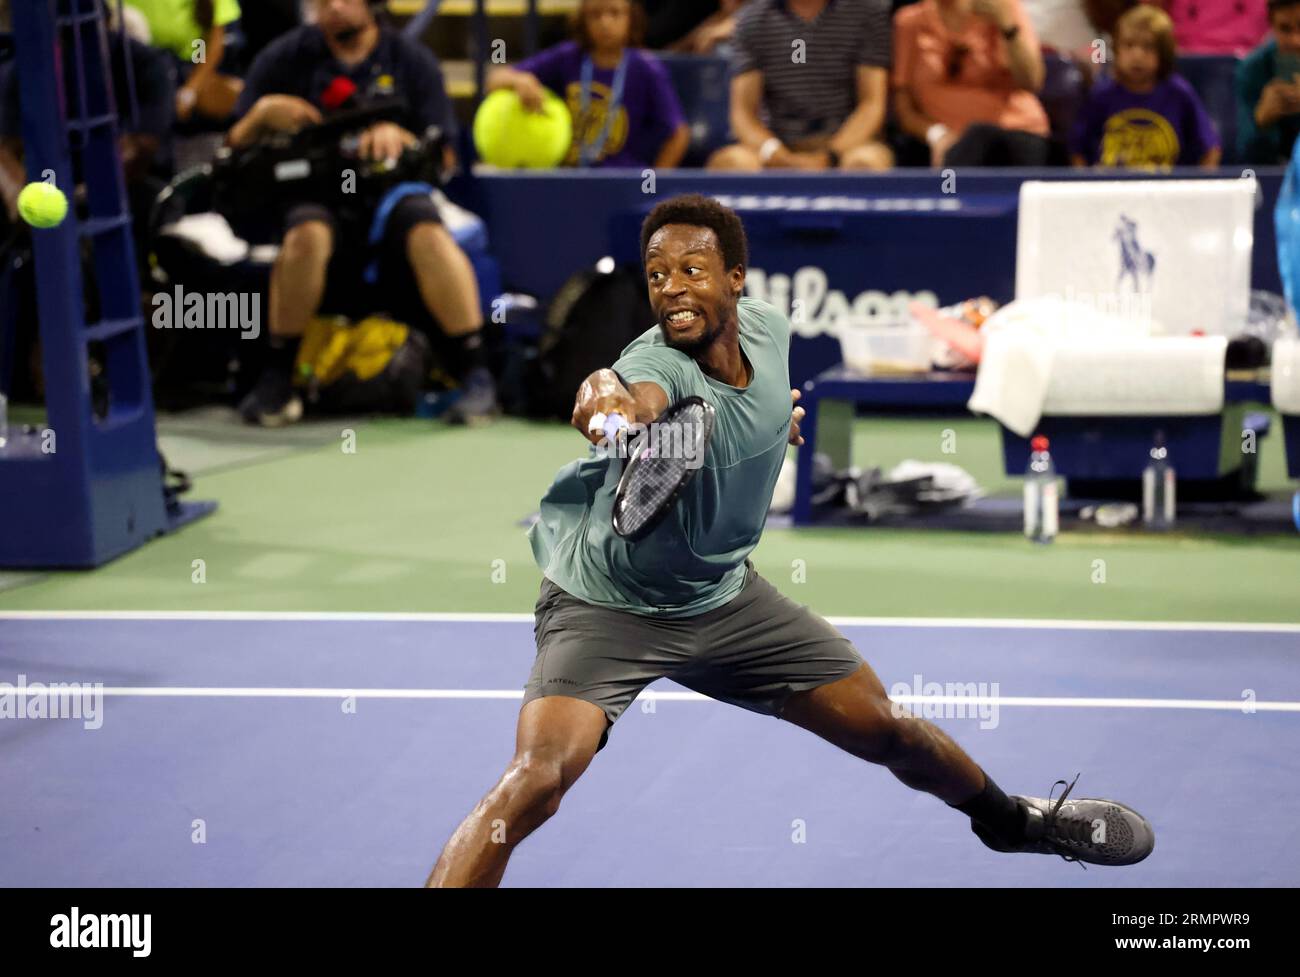 Flushing Meadows, New York, USA. 29th Aug, 2023. Gael Monfils of France in action against Taro Daniel of Japan during first round action at the US Open in New York City. Credit: Adam Stoltman/Alamy Live News Stock Photo